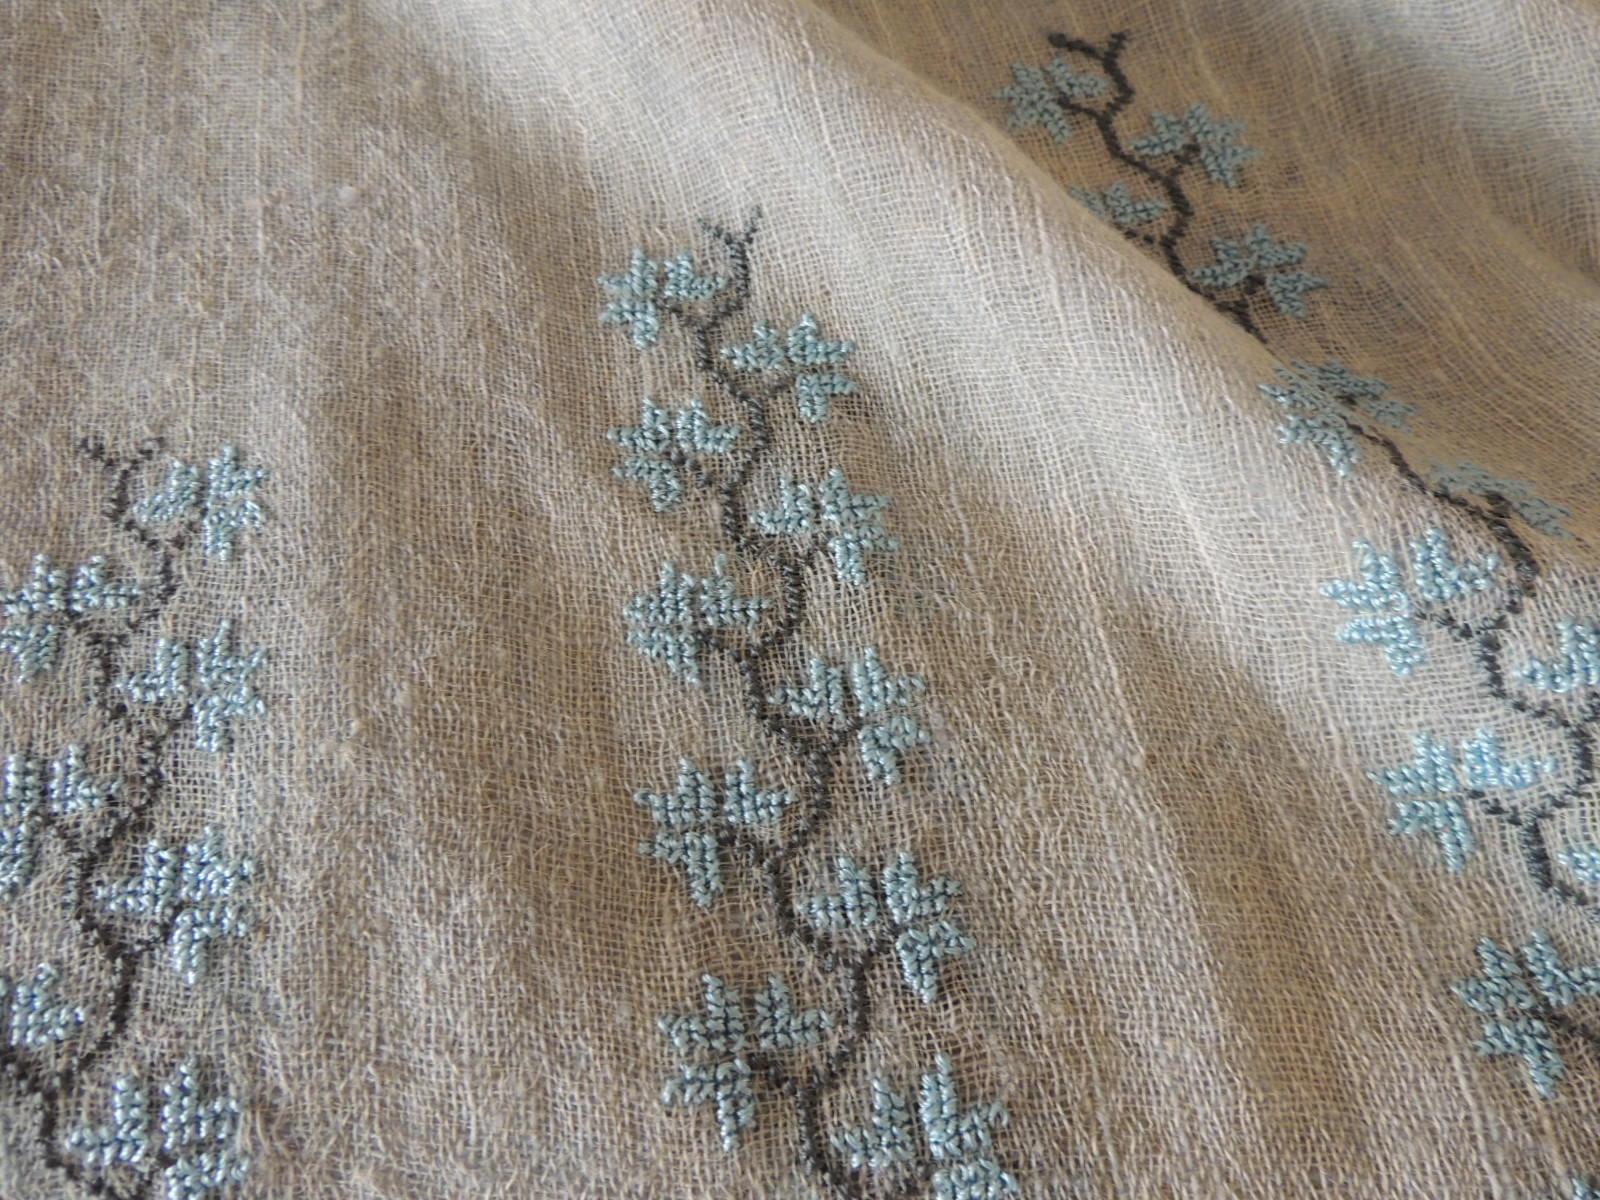 Hand-Crafted Long Aqua Embroidered Camel Hair Scarf with Long Fringes